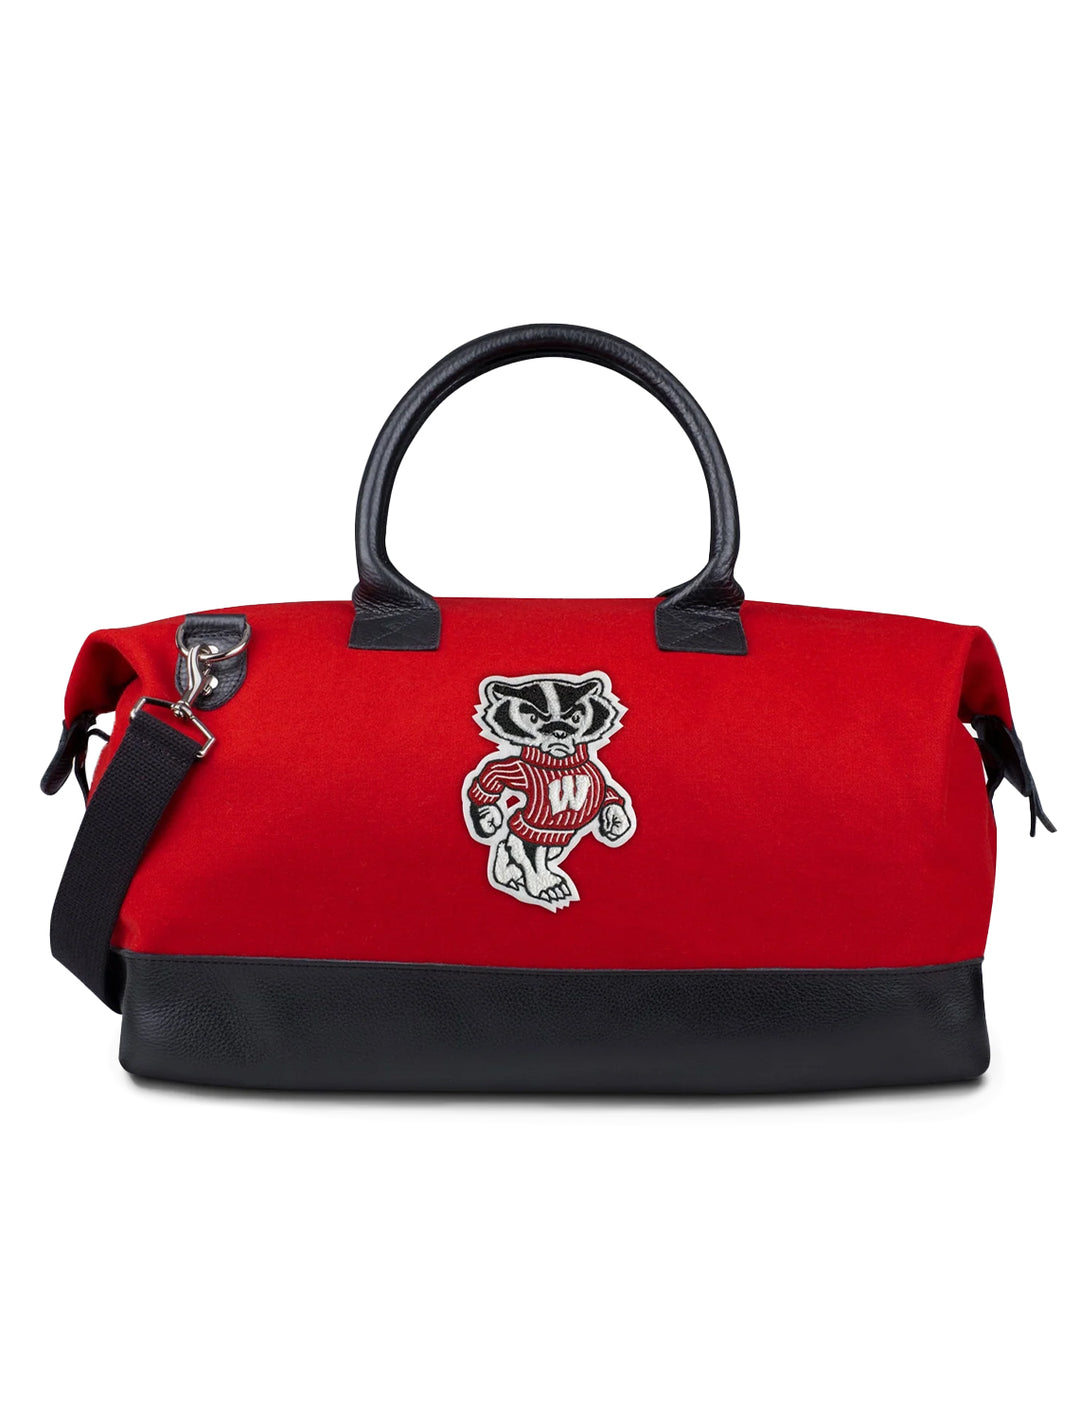 Front view of Heritage Gear's red bucky mascot weekender.